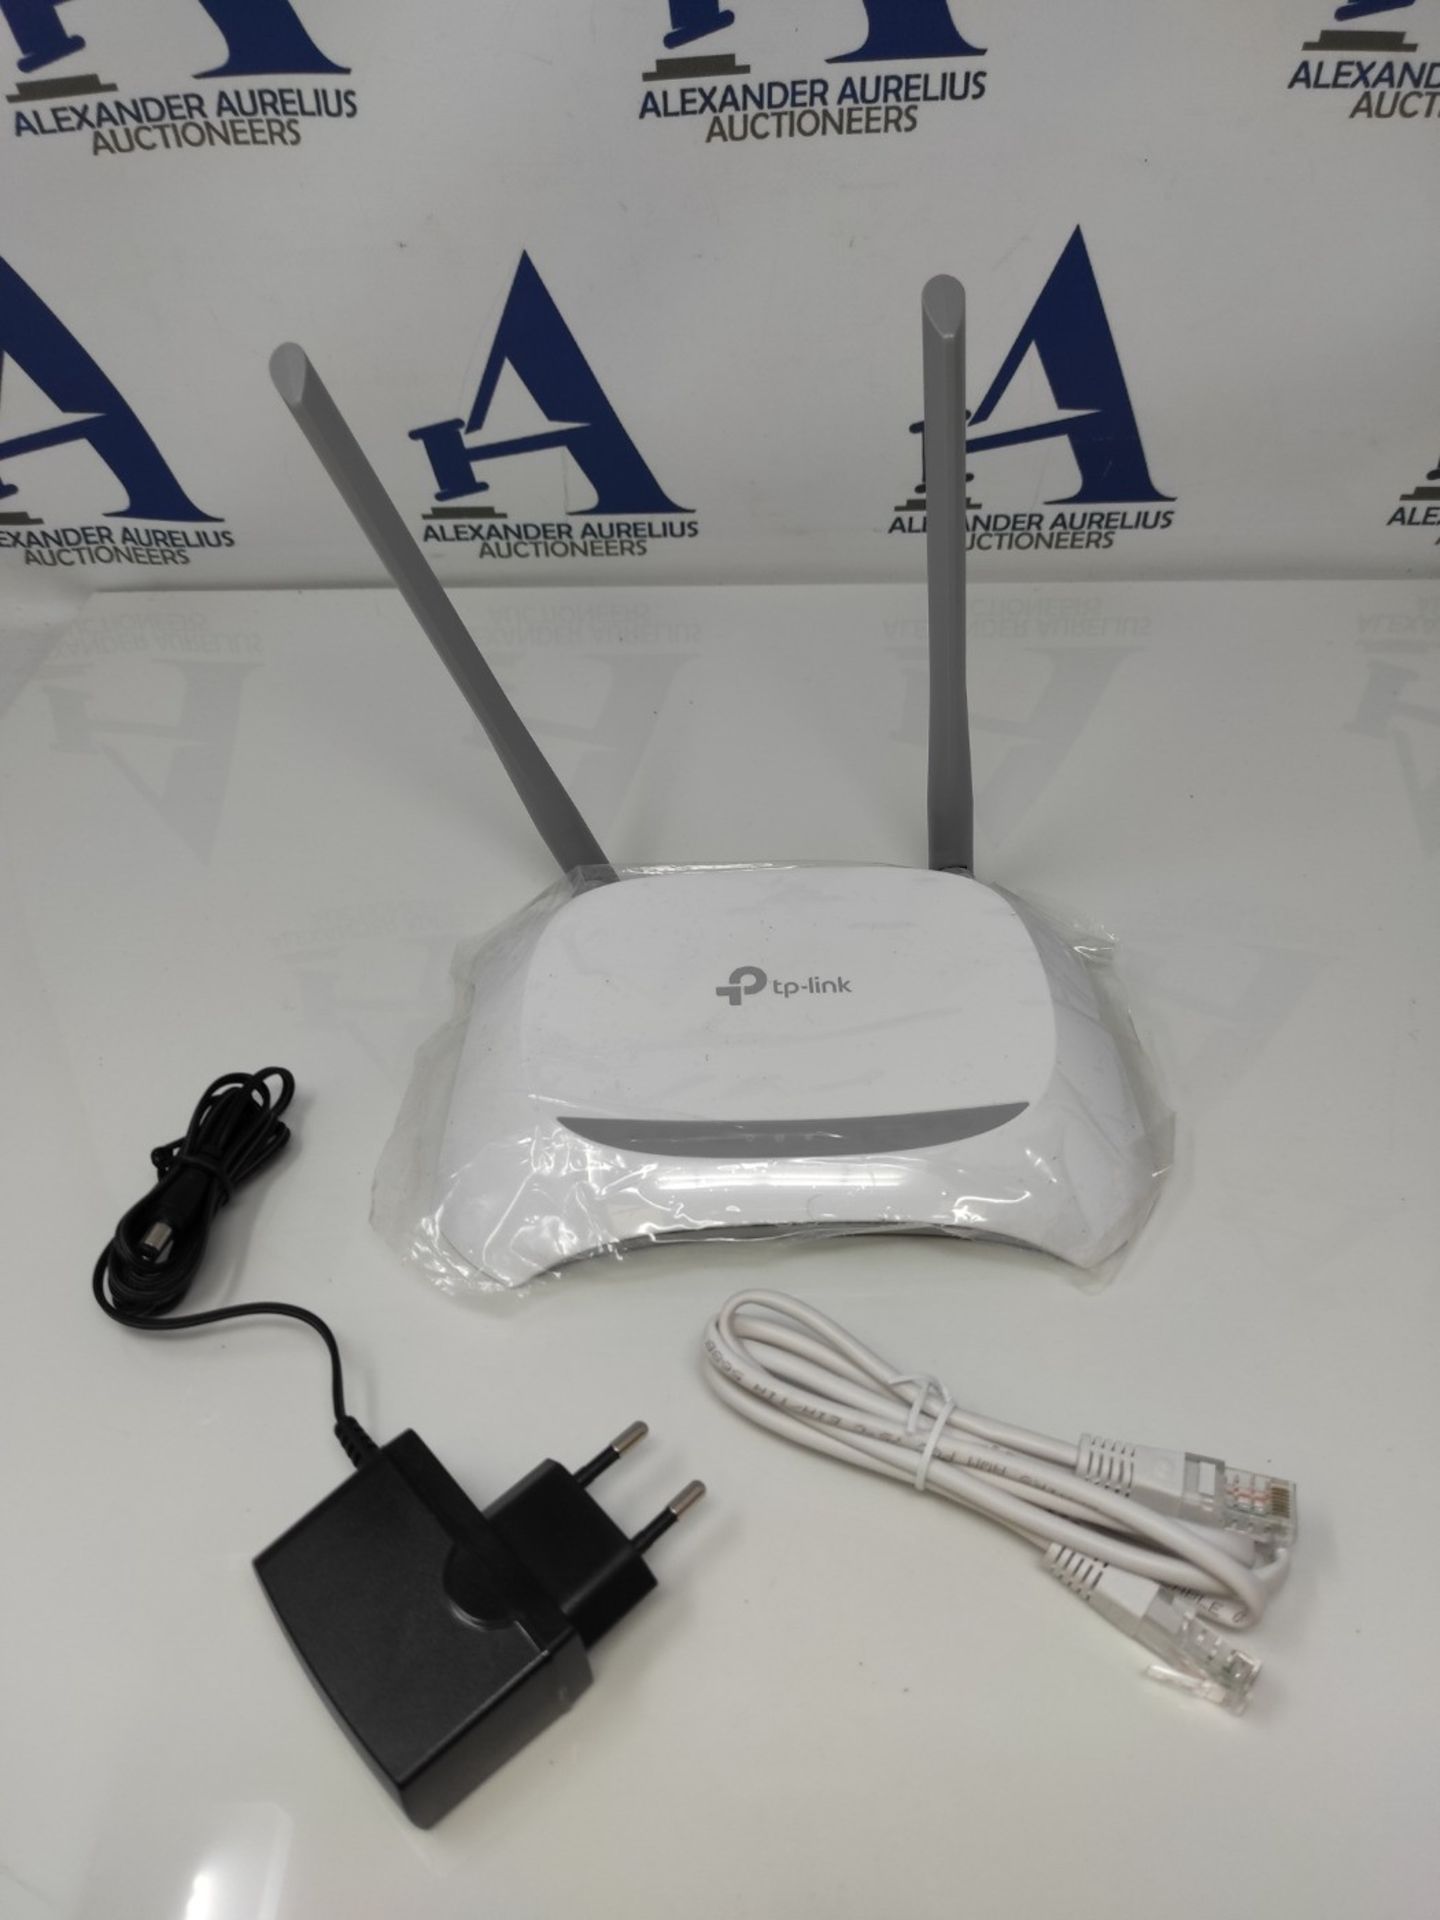 TP-Link TL-WR840N Router Ethernet Wi-Fi N300 Wireless, 5 Port 10/100M, Parental Contro - Image 2 of 2